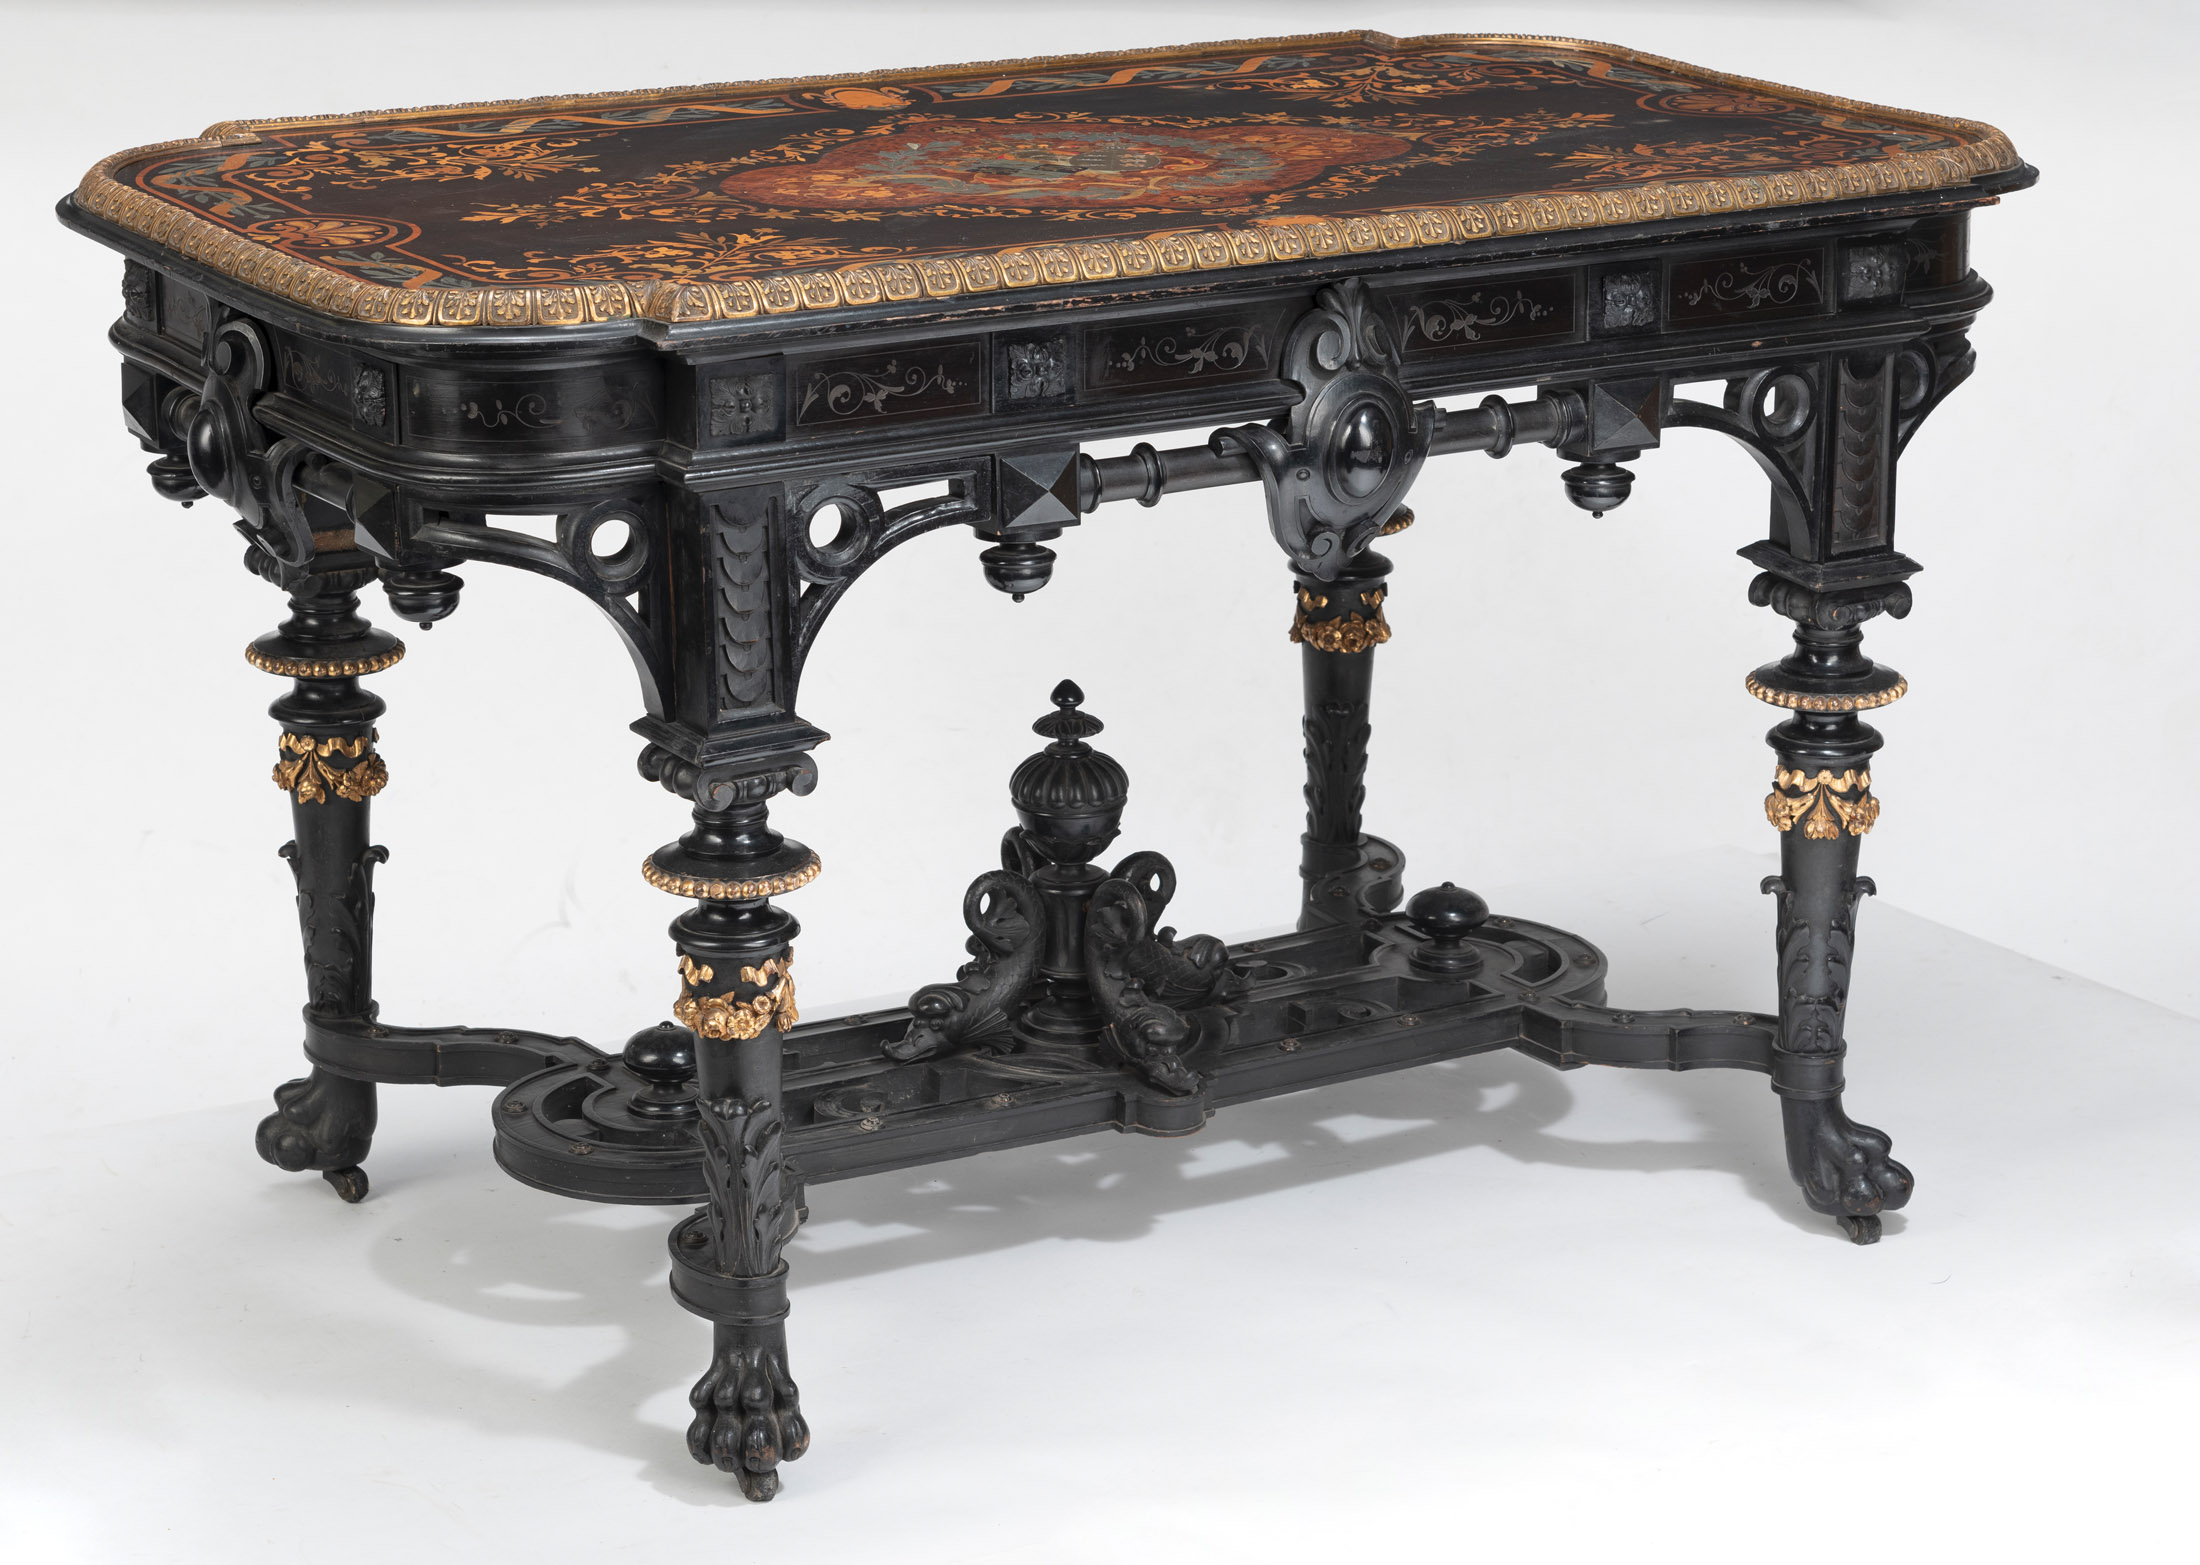 Magnificent centre table with the alliance coat of arms of Agnes von Württemberg and Prince Heinric - Image 11 of 11